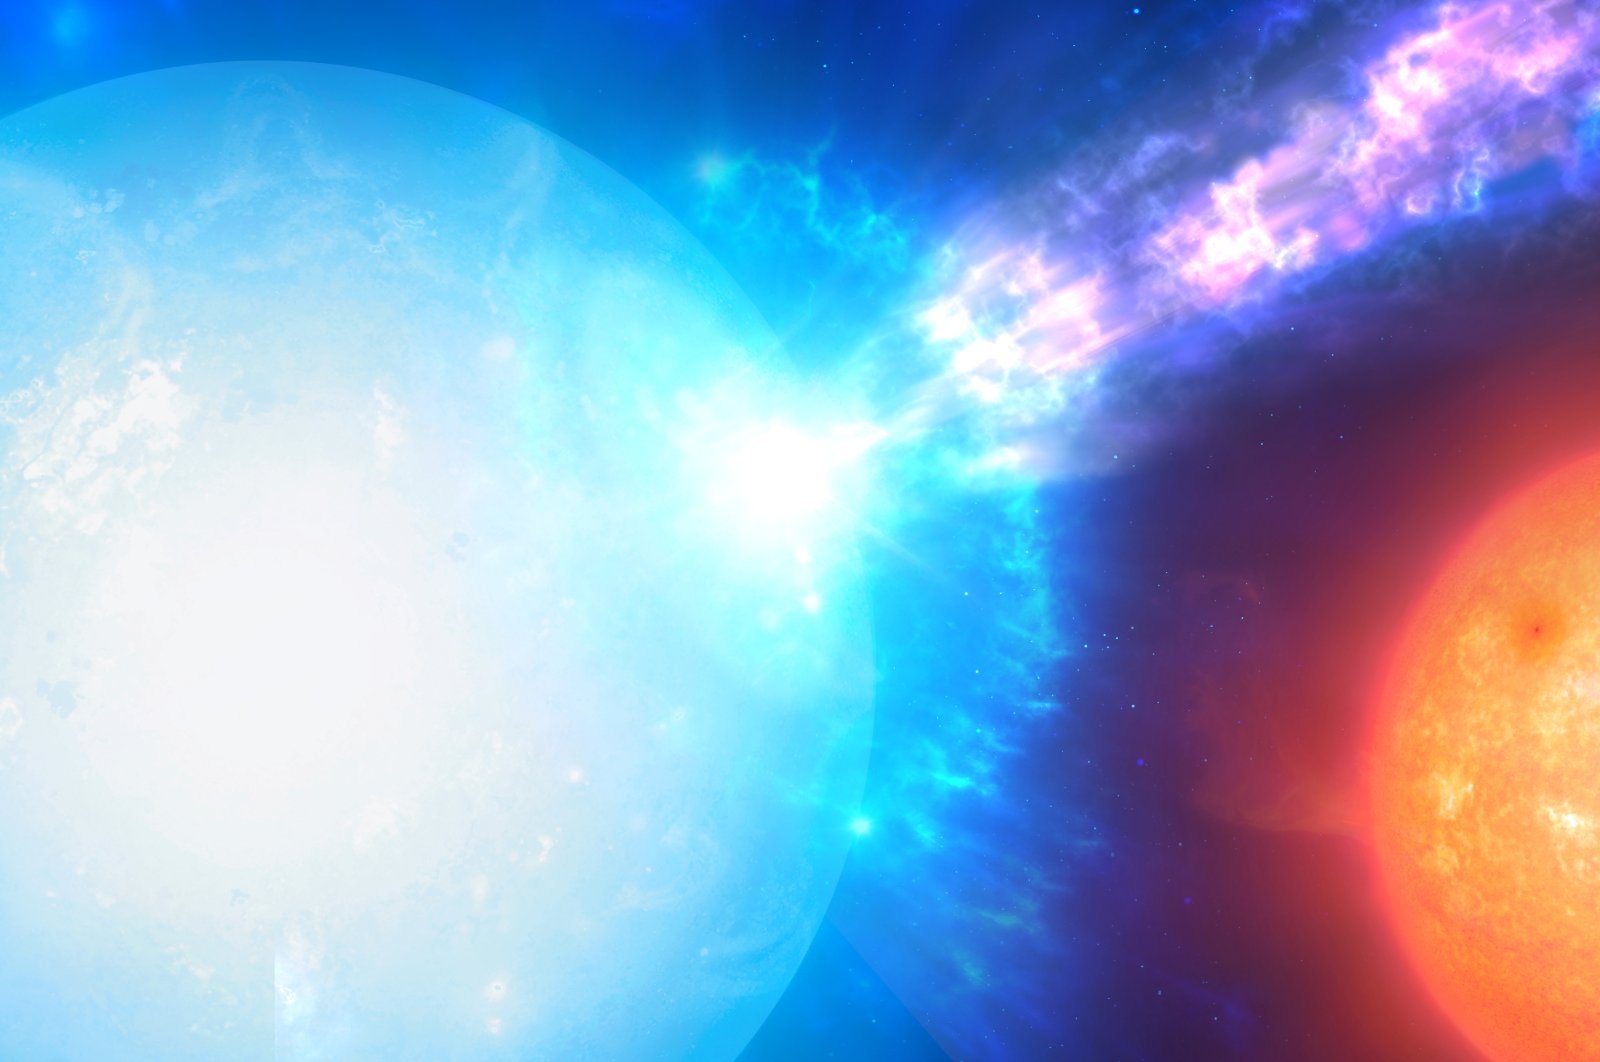 An artist’s impression shows a two-star system, with a white dwarf and a companion star, where stellar explosions called micronovae may occur. (Reuters Photo)